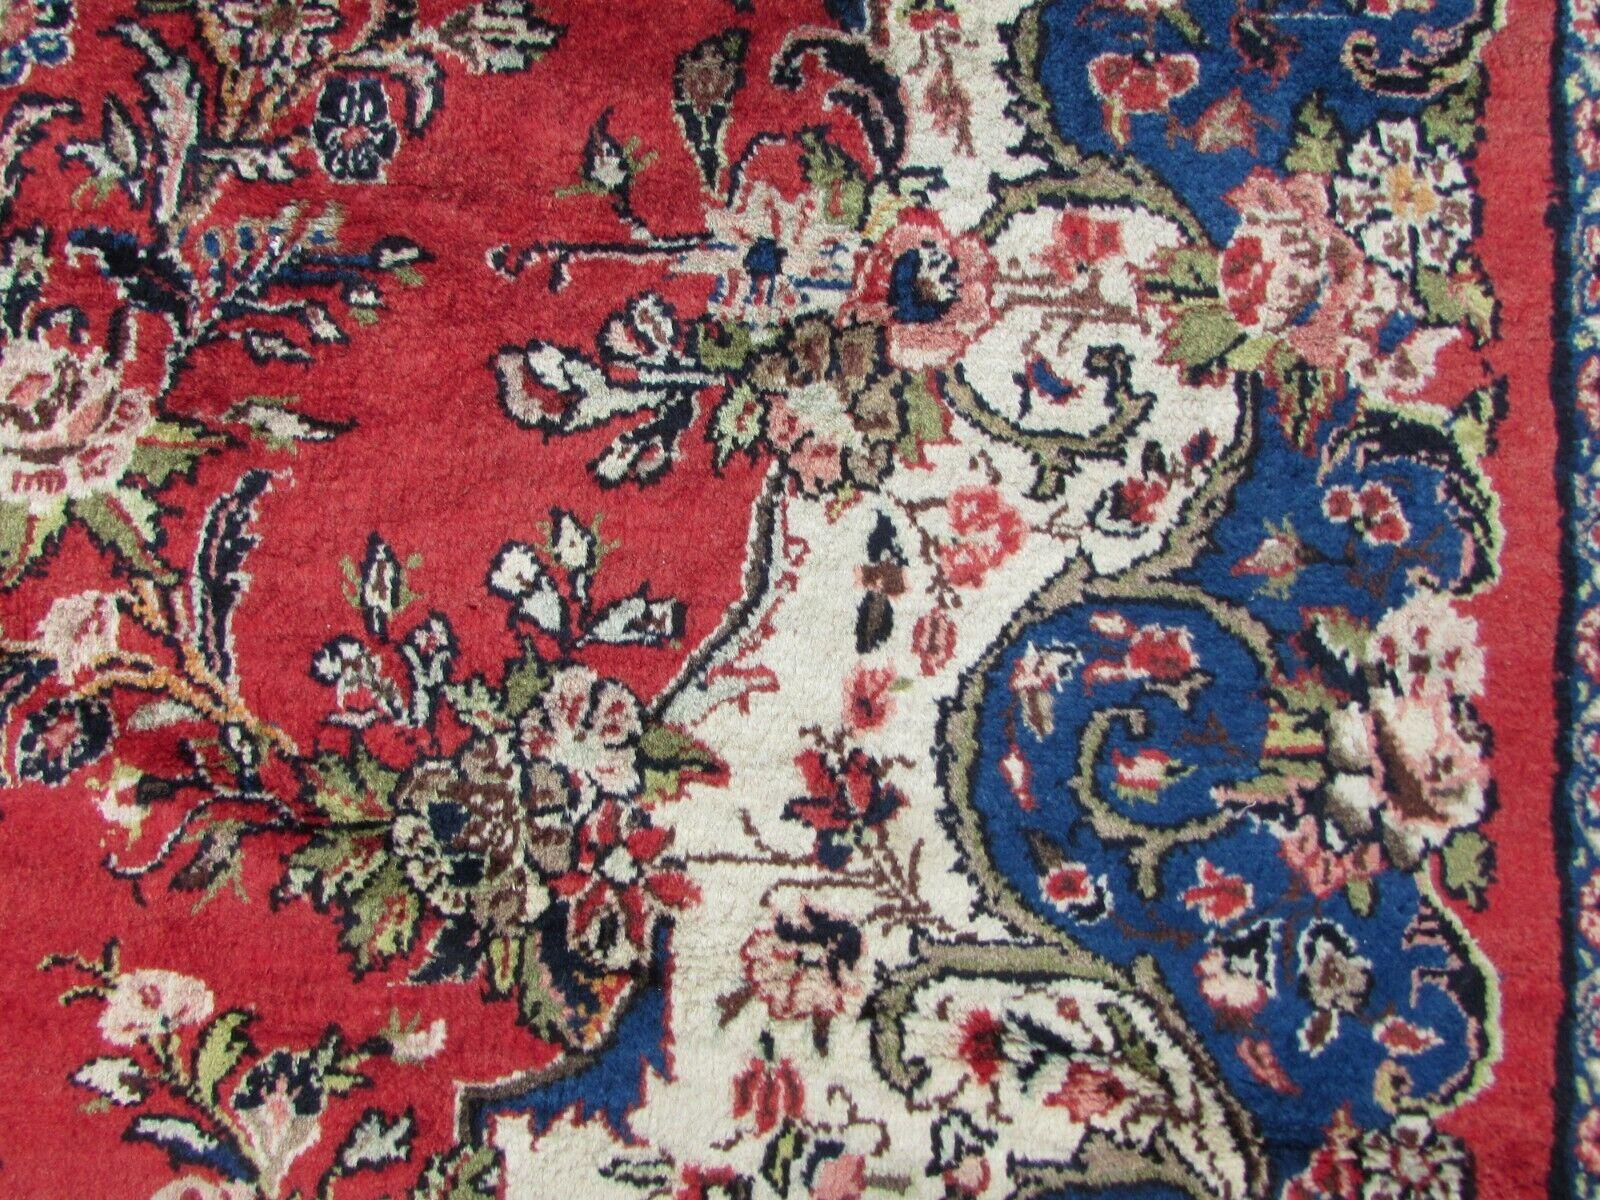 French Handmade Vintage Persian Style Sarouk Oversize Rug 10.7' x 16.4', 1970s - 1Q72 For Sale